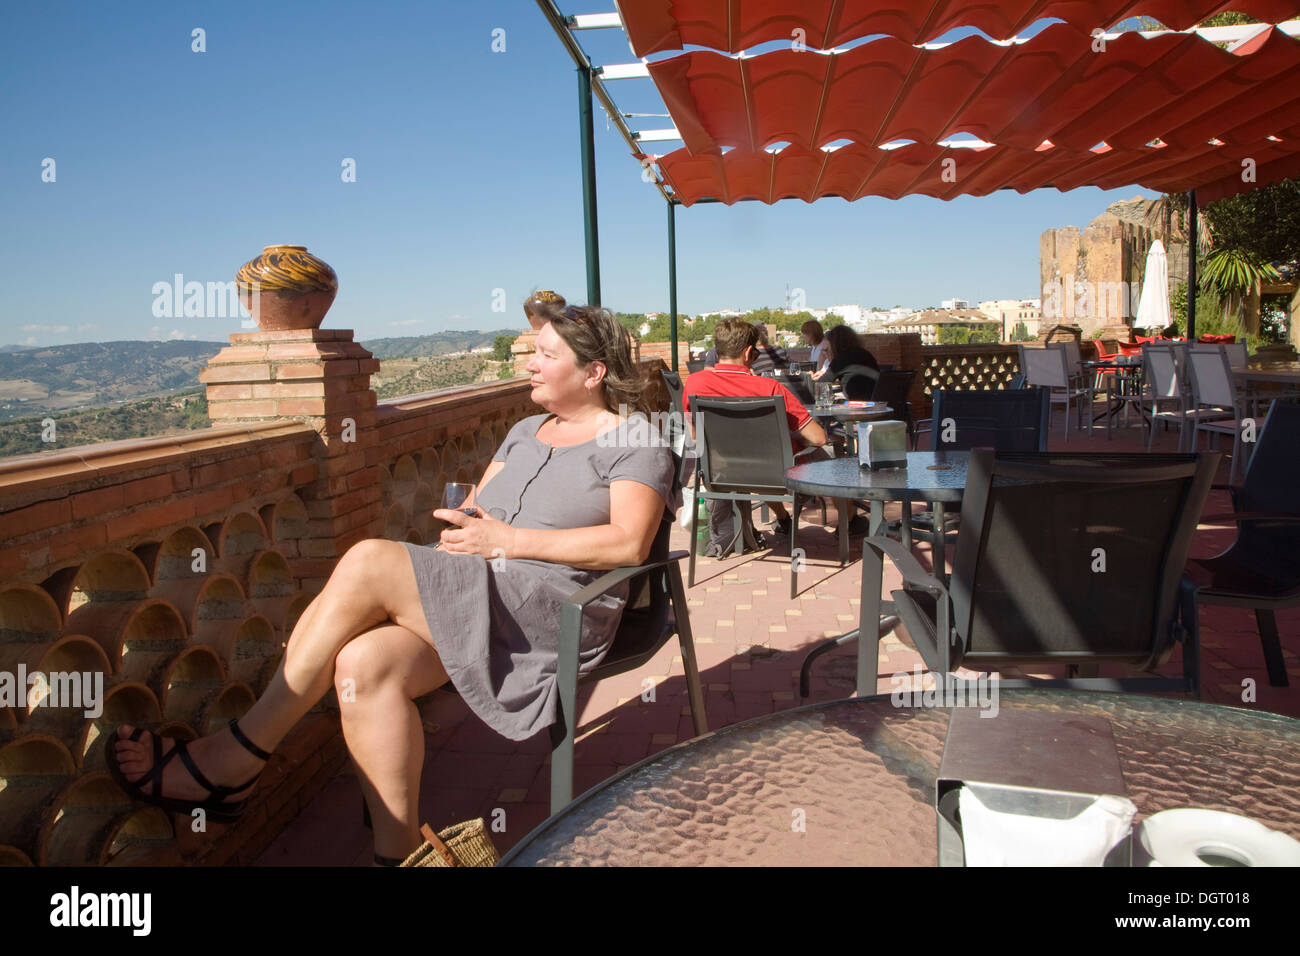 Woman sitting in the sun on a cafe terrace Ronda Spain Stock Photo